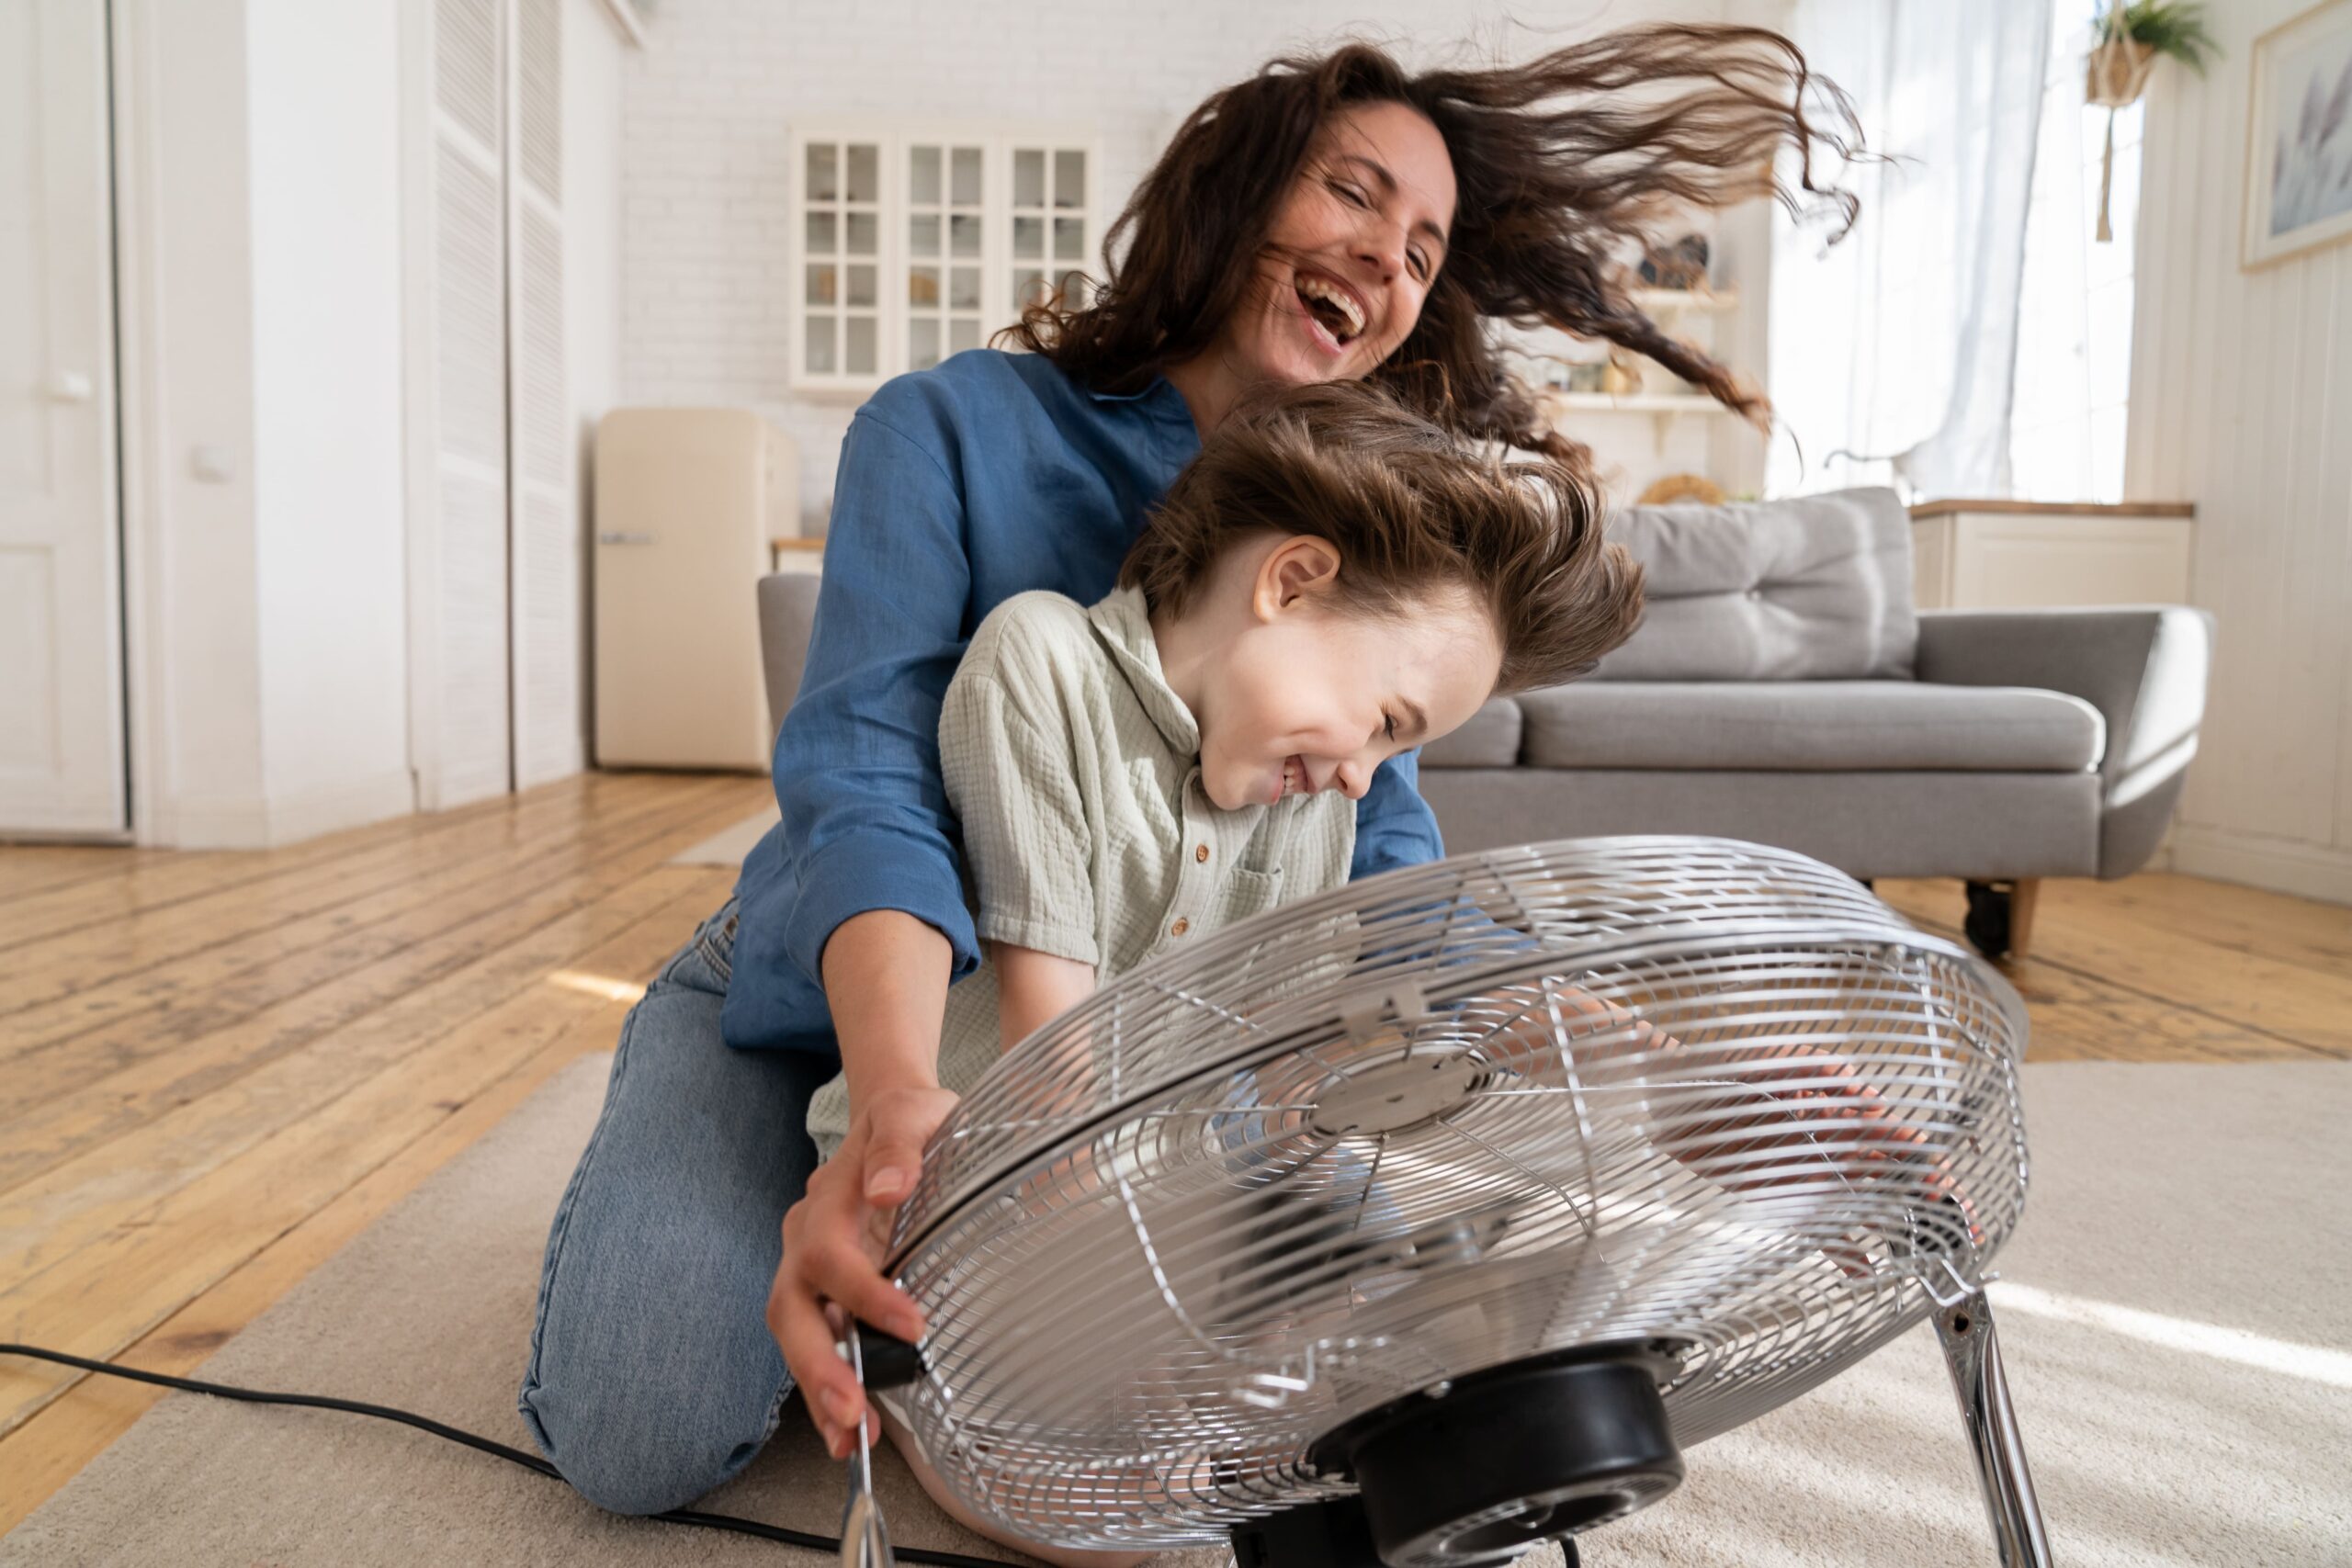 Heating and cooling your home in Maine